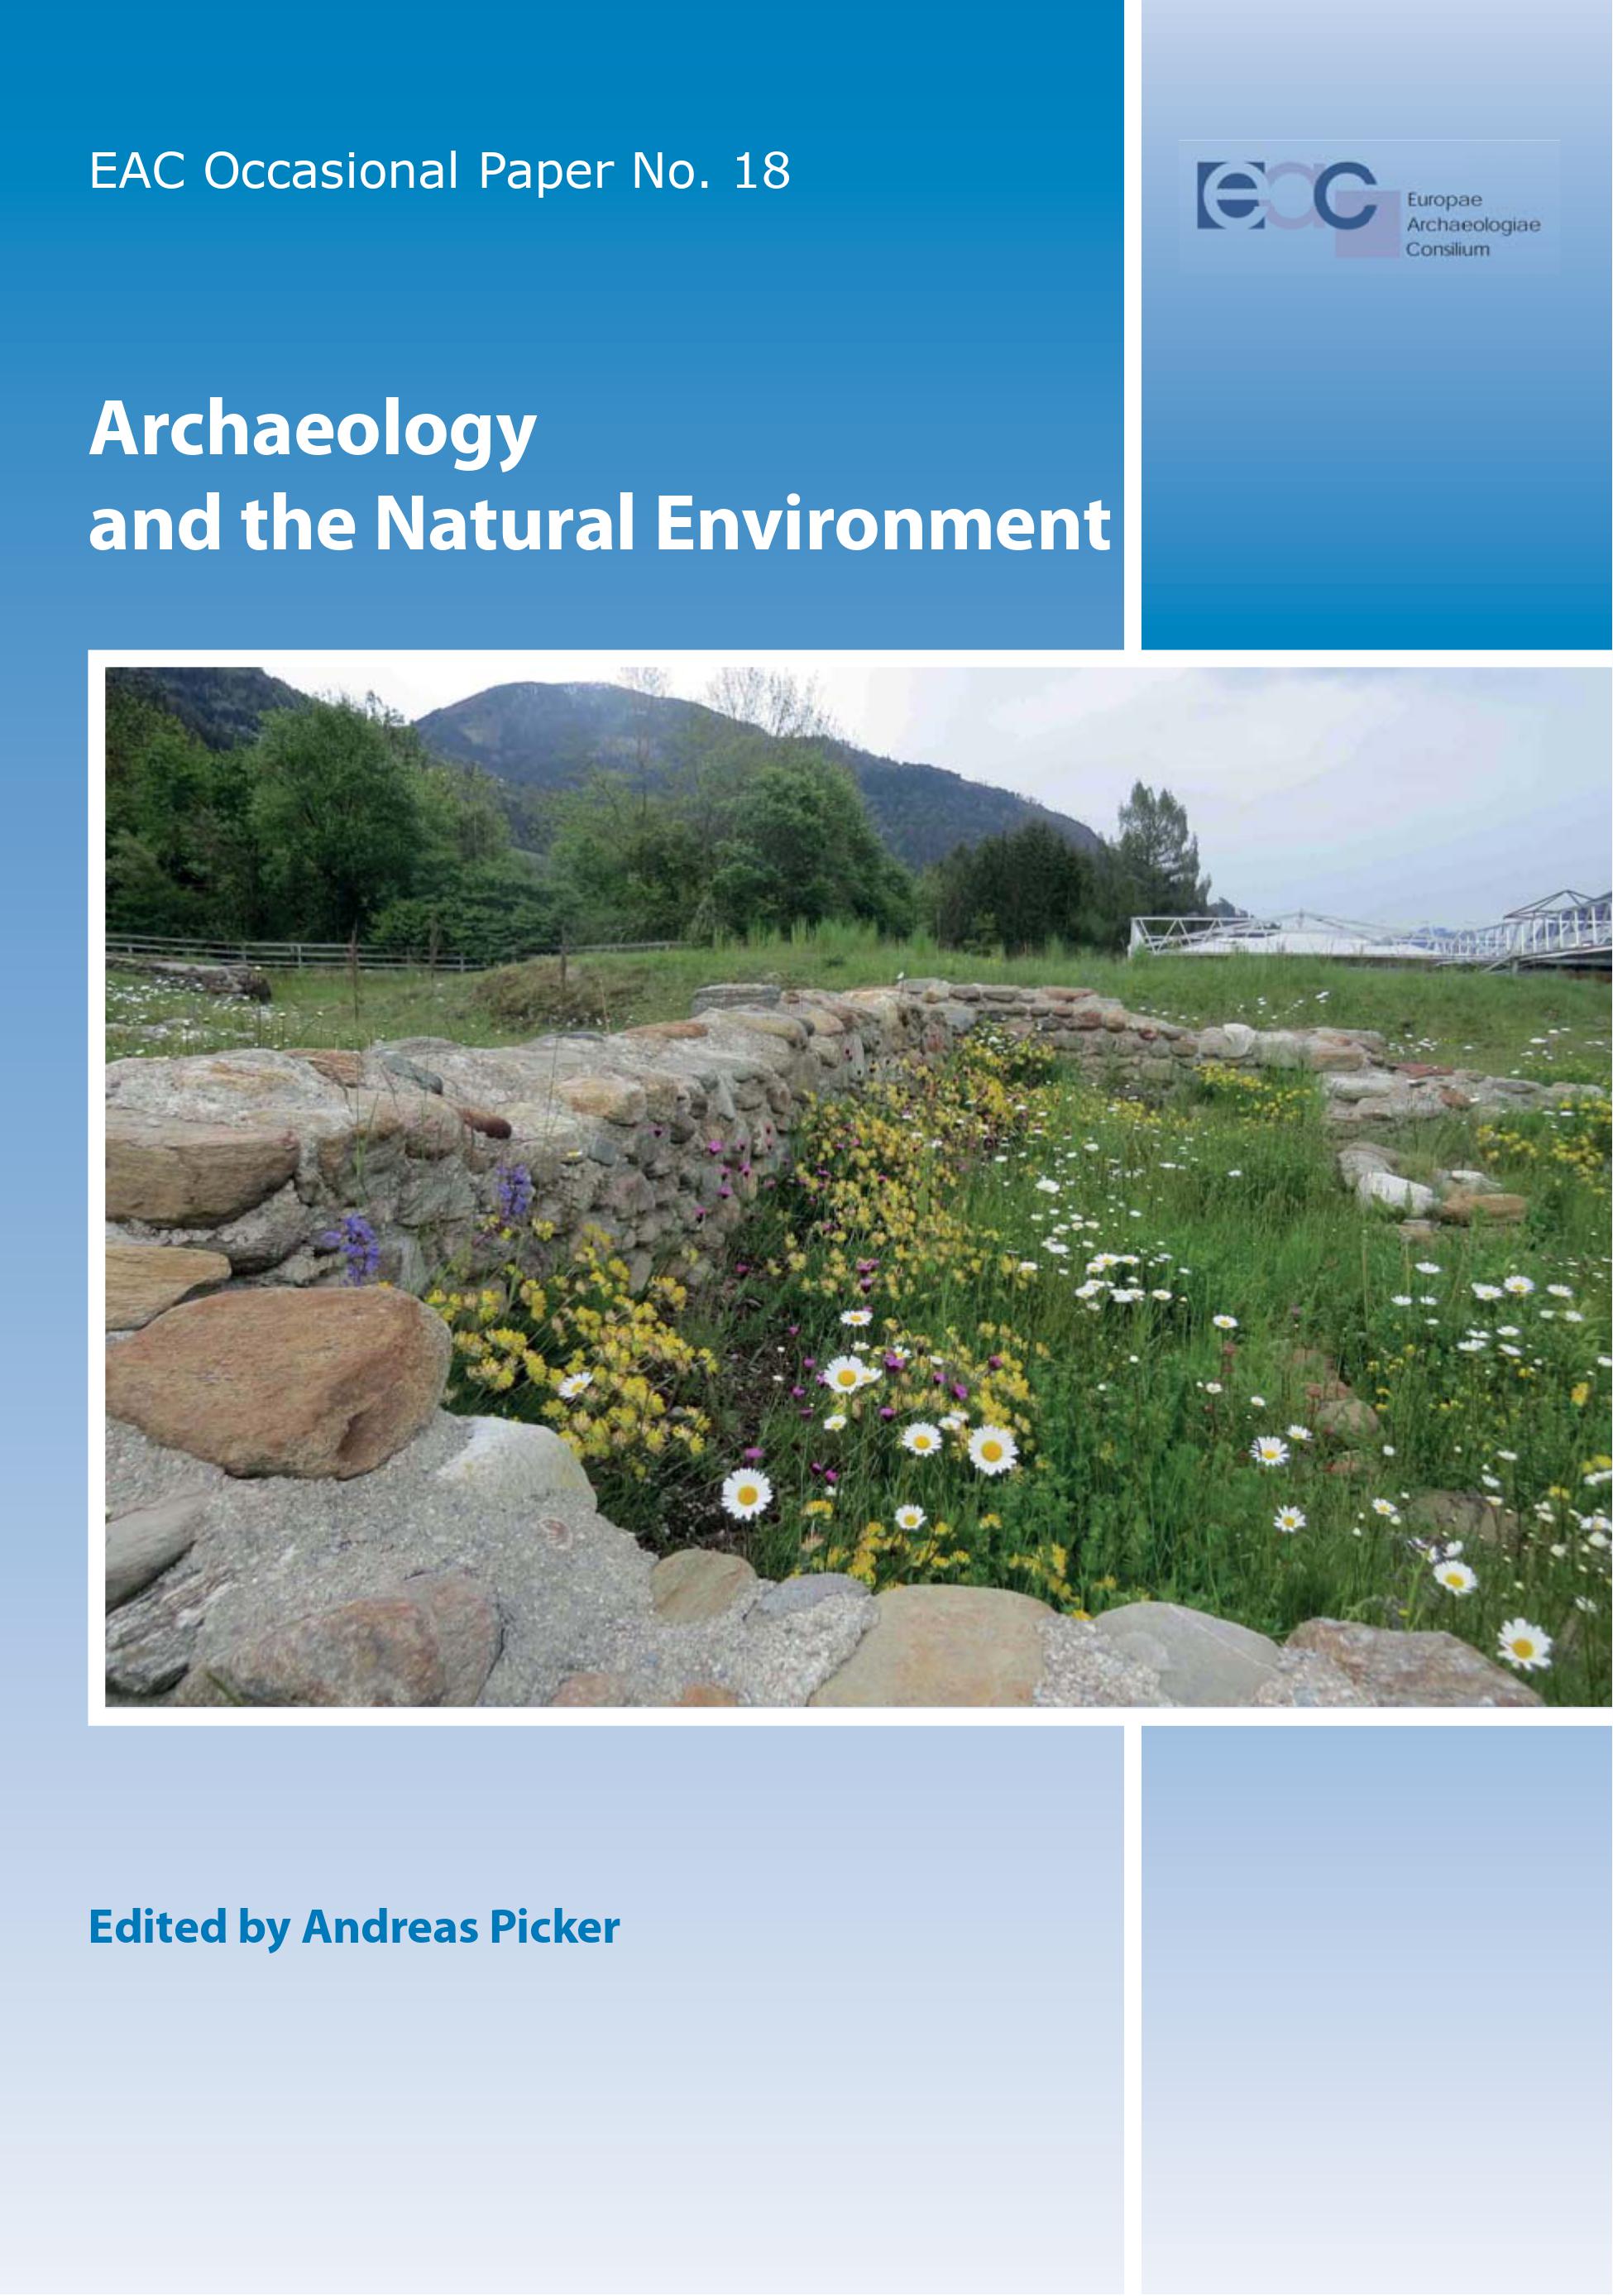 Picker, Andreas (ed.) : Archaeology and the Natural Environment  